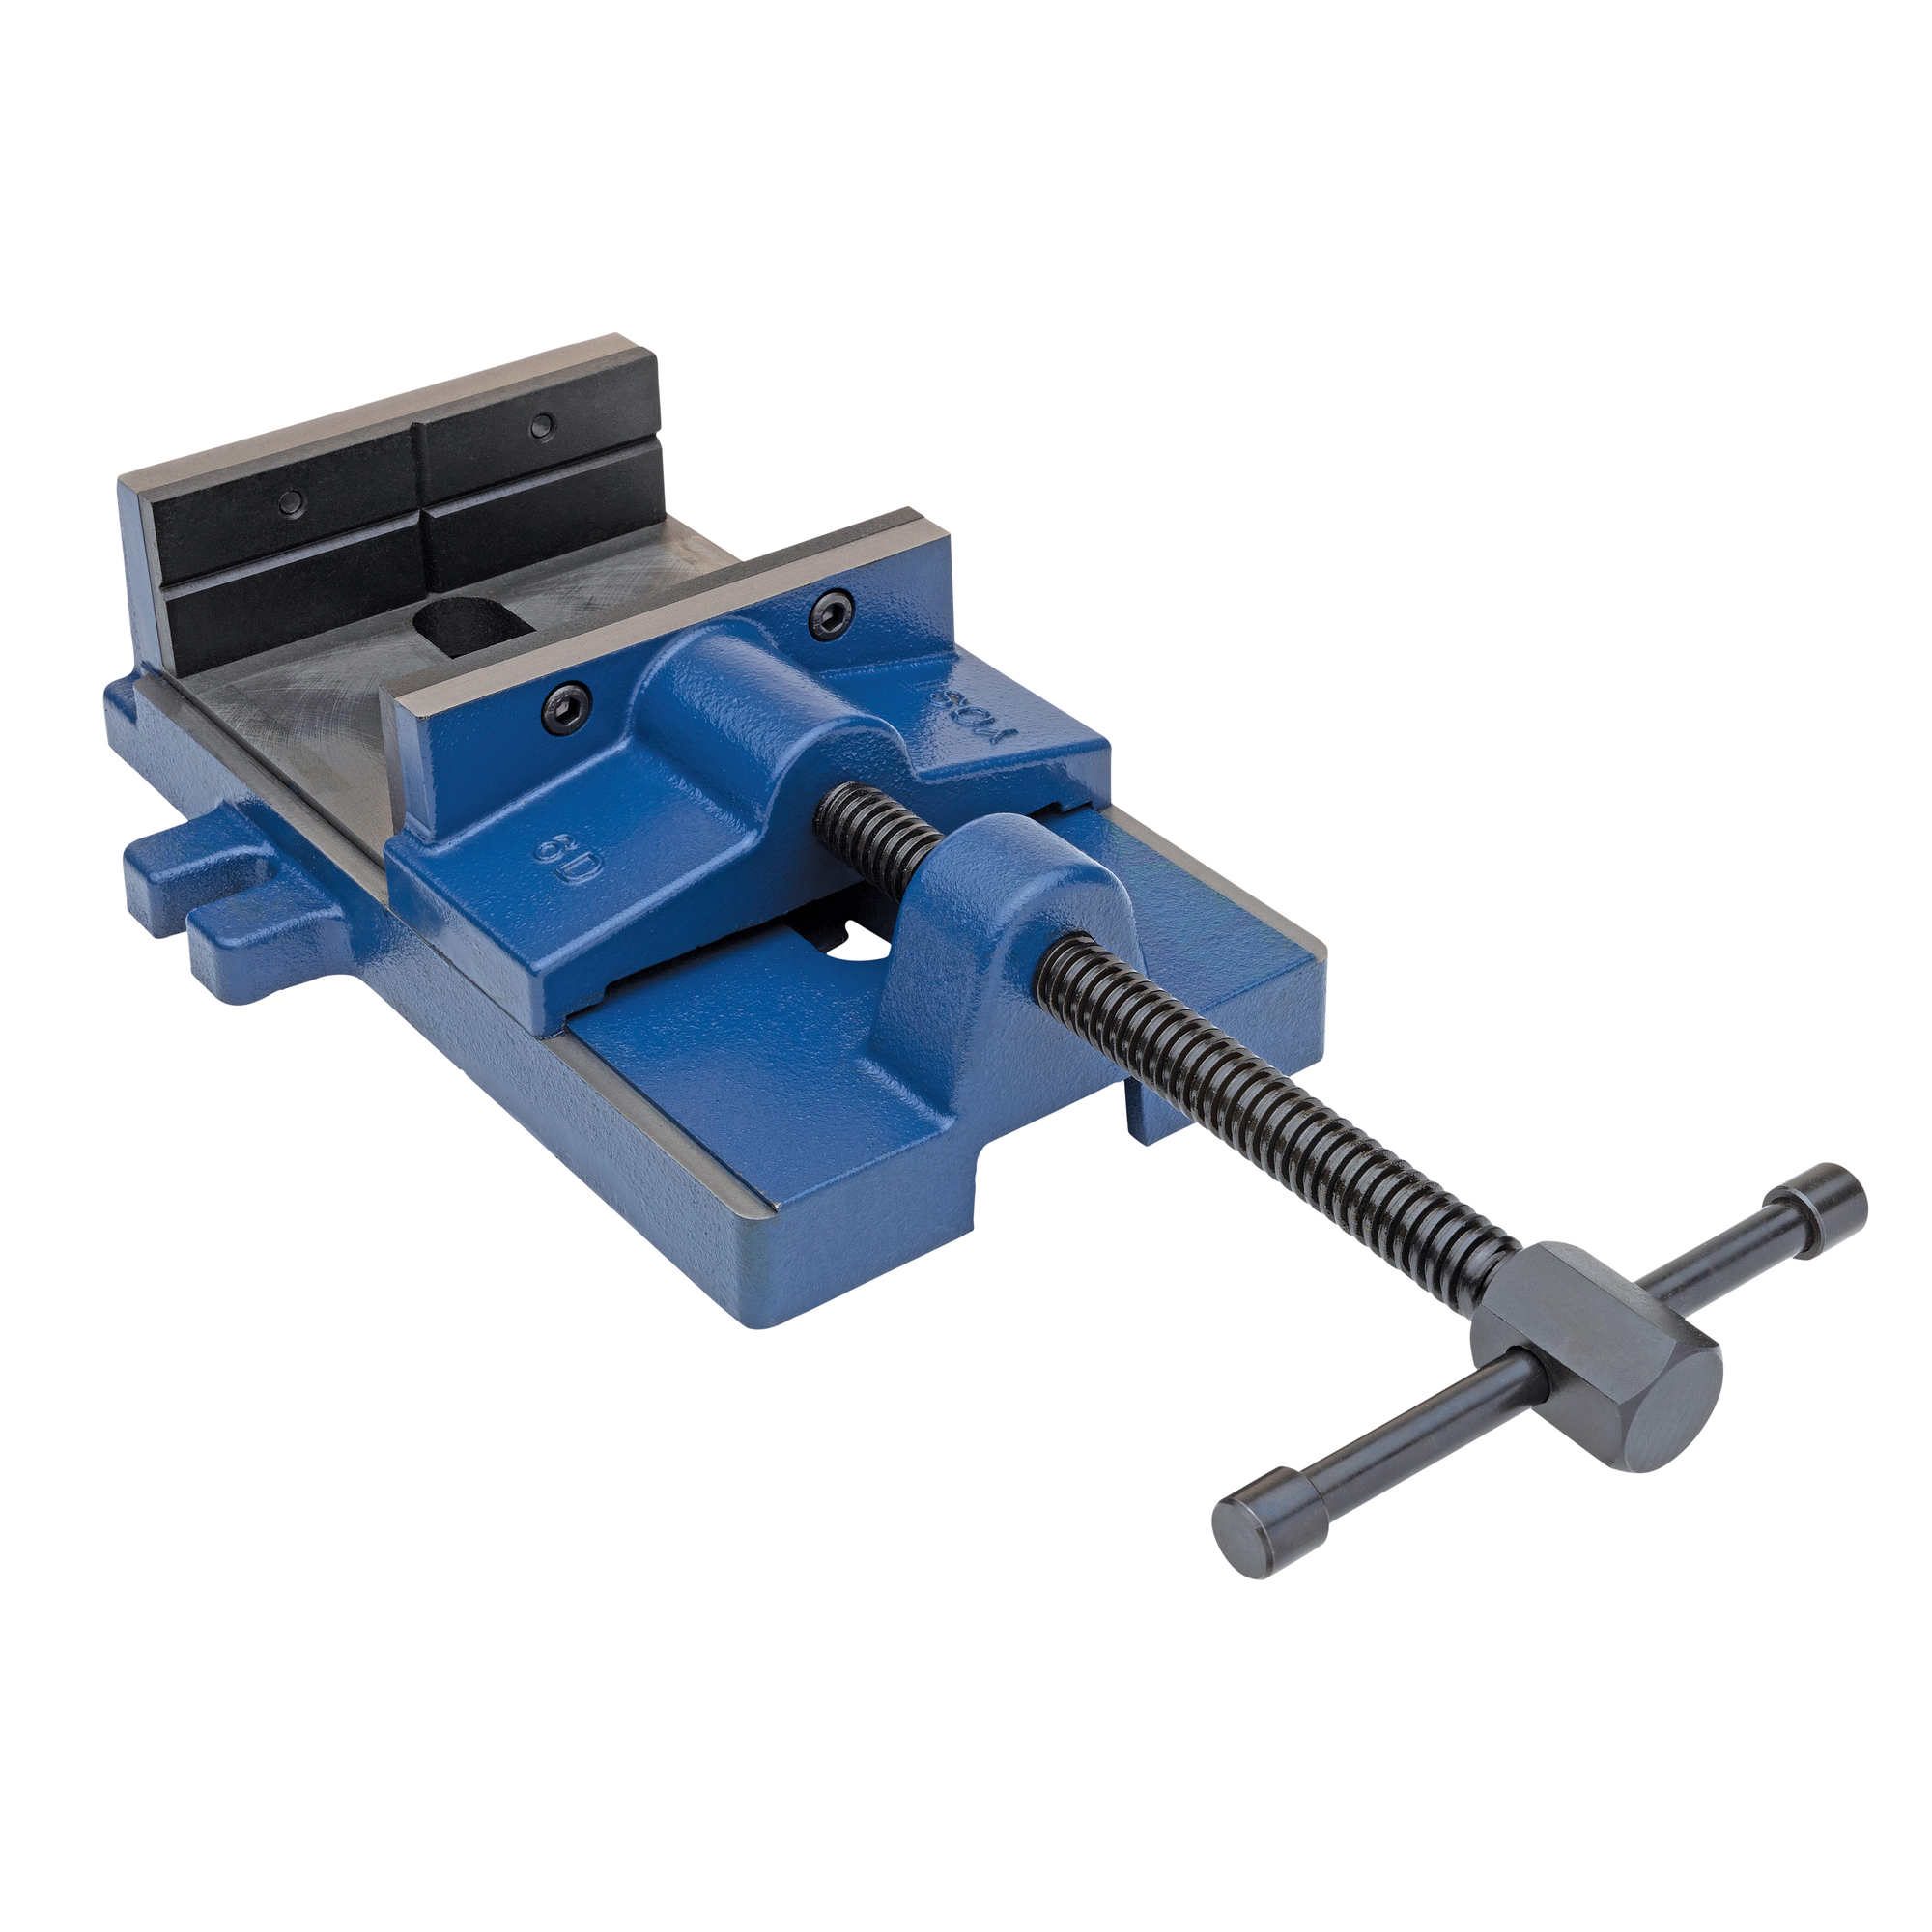 Yost Vises, 6Inch Drill Press Vise, Jaw Width 6 in, Jaw Capacity 6 in, Material Cast Iron, Model 6D -  56436